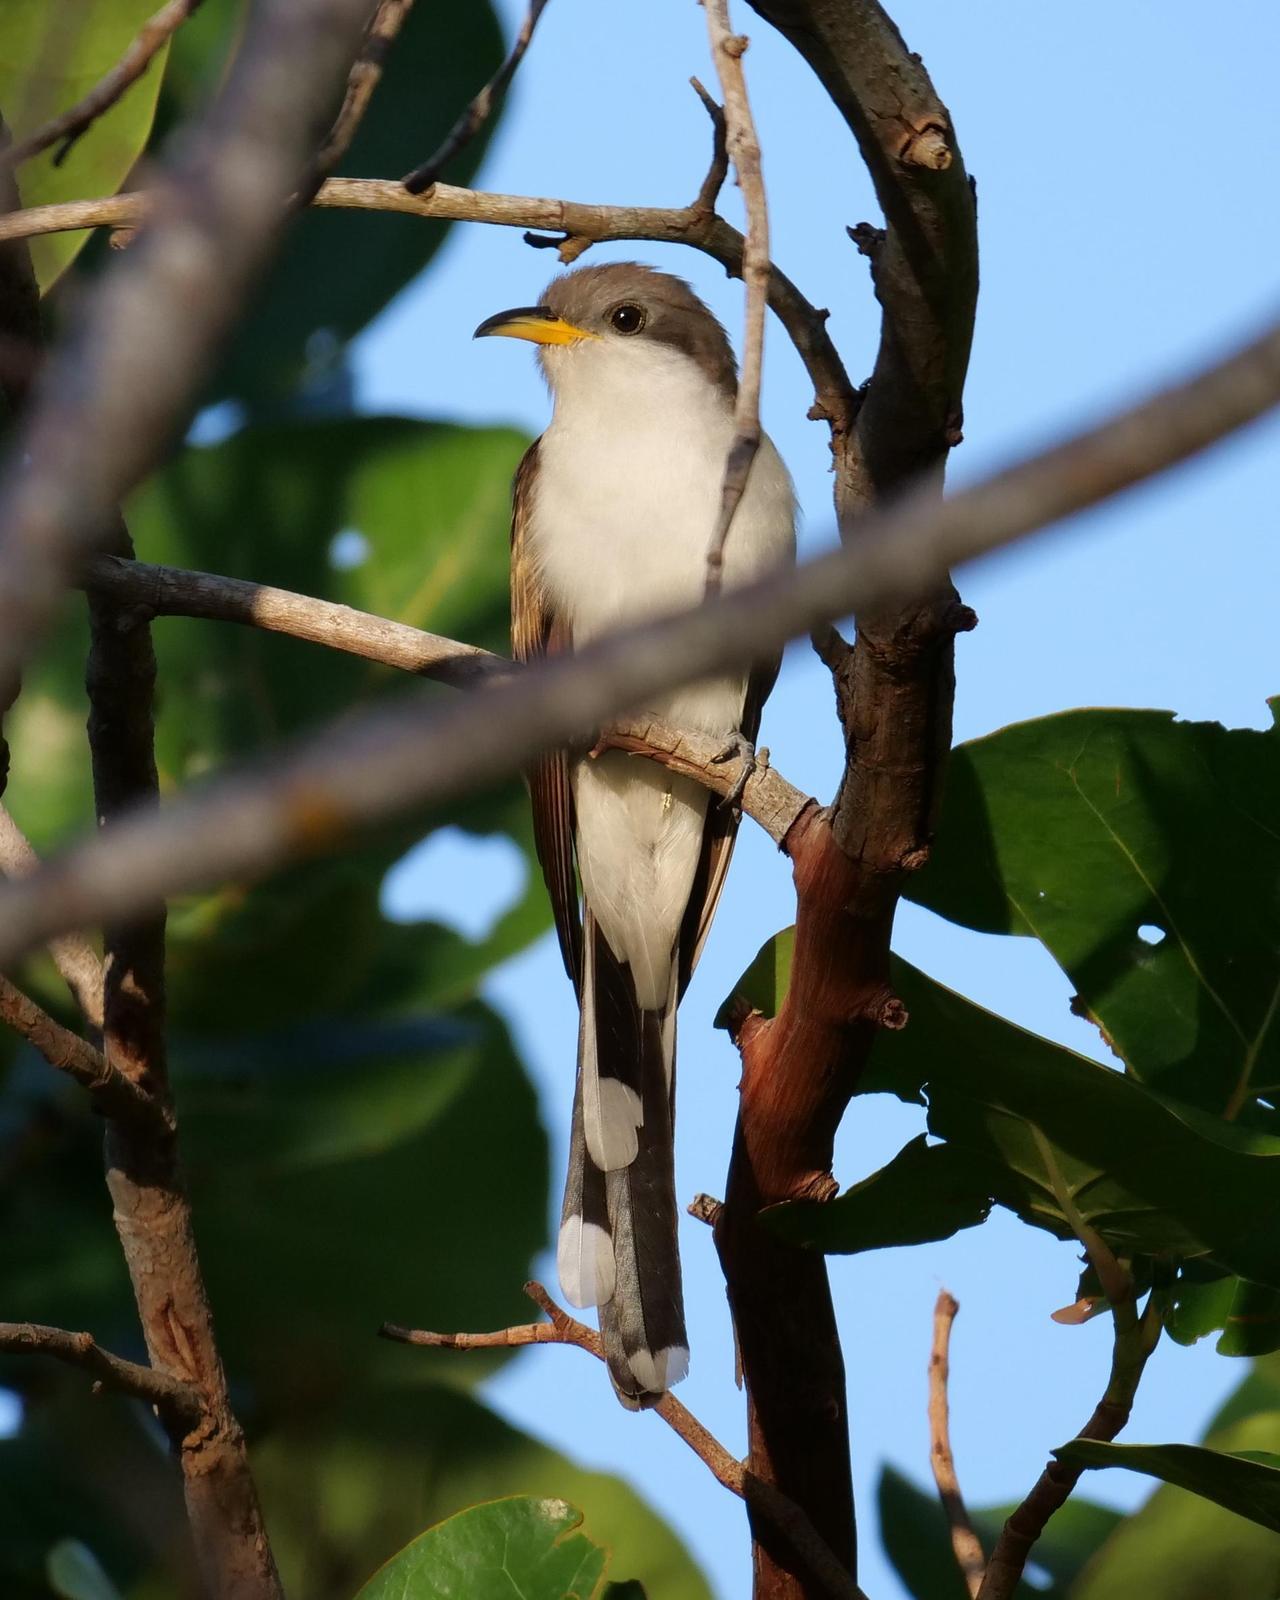 Yellow-billed Cuckoo Photo by Steve Percival